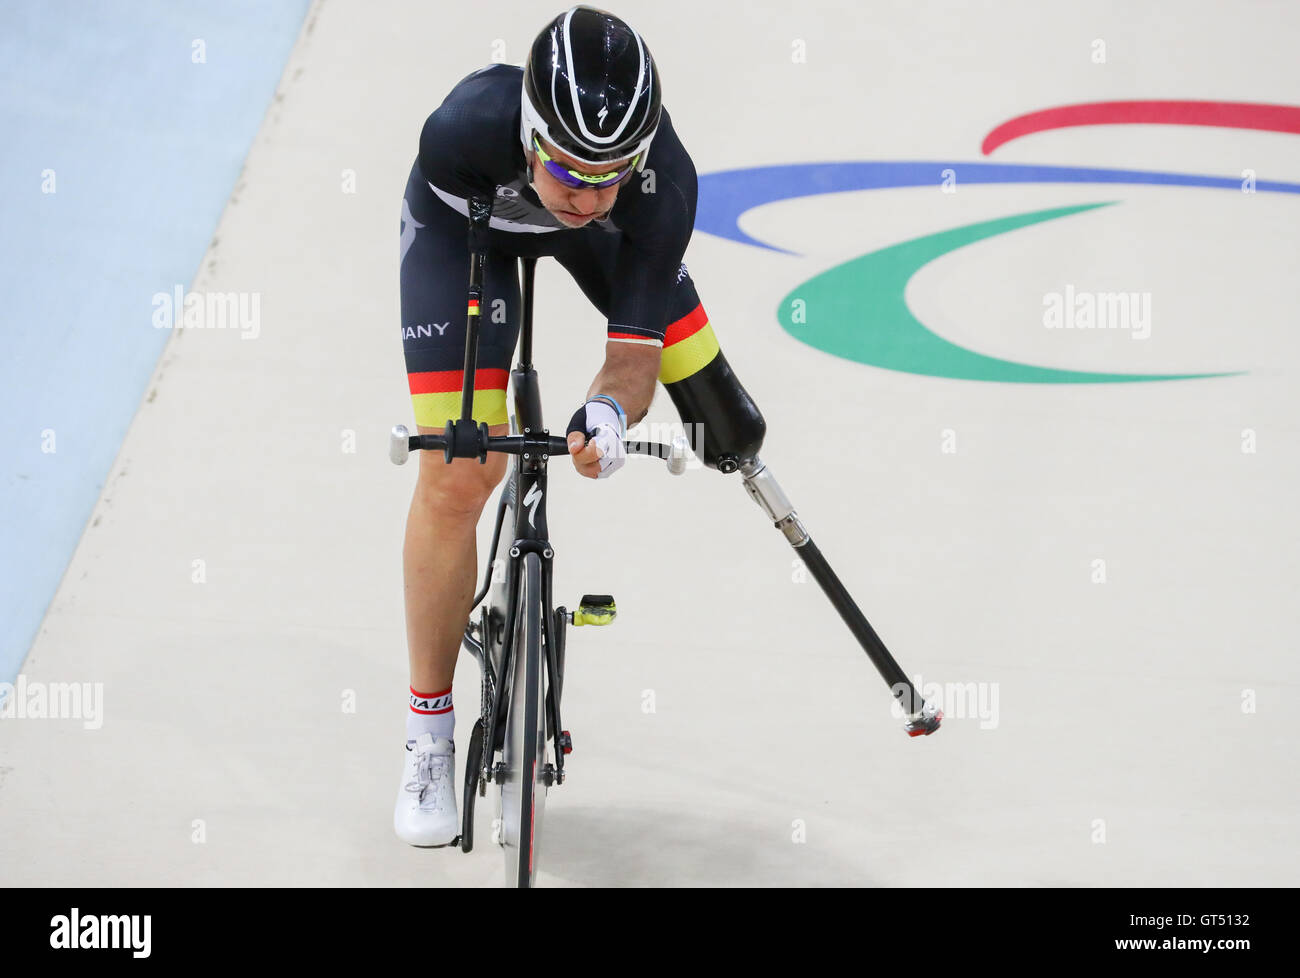 Rio de Janeiro, Brazil. 9th September, 2016.  Cyclist Erich Winkler of Germany competes in the Cycling Track - Men's C1 3000M Individual Pursuit Qualification of the Rio 2016 Paralympic Games, Rio de Janeiro, Brazil, 09 September 2016. Winkler's prothesis departed from the pedal. He was allowed by the jury to repeat his heat and qualified than for bronze medal race. Credit:  dpa picture alliance/Alamy Live News Stock Photo